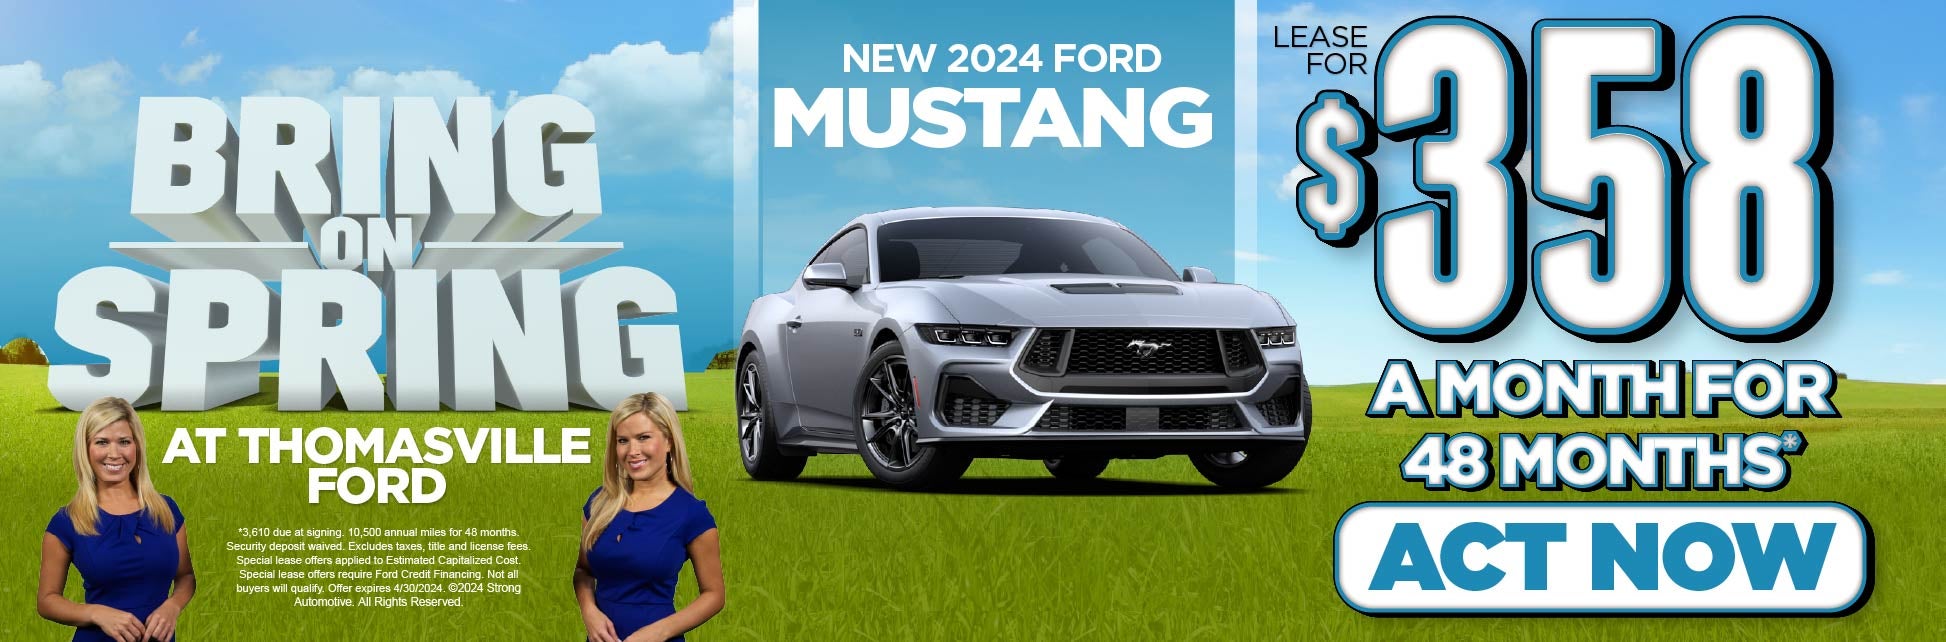 New 2024 Ford Mustang lease $358/mo for 48 mos. Act Now.